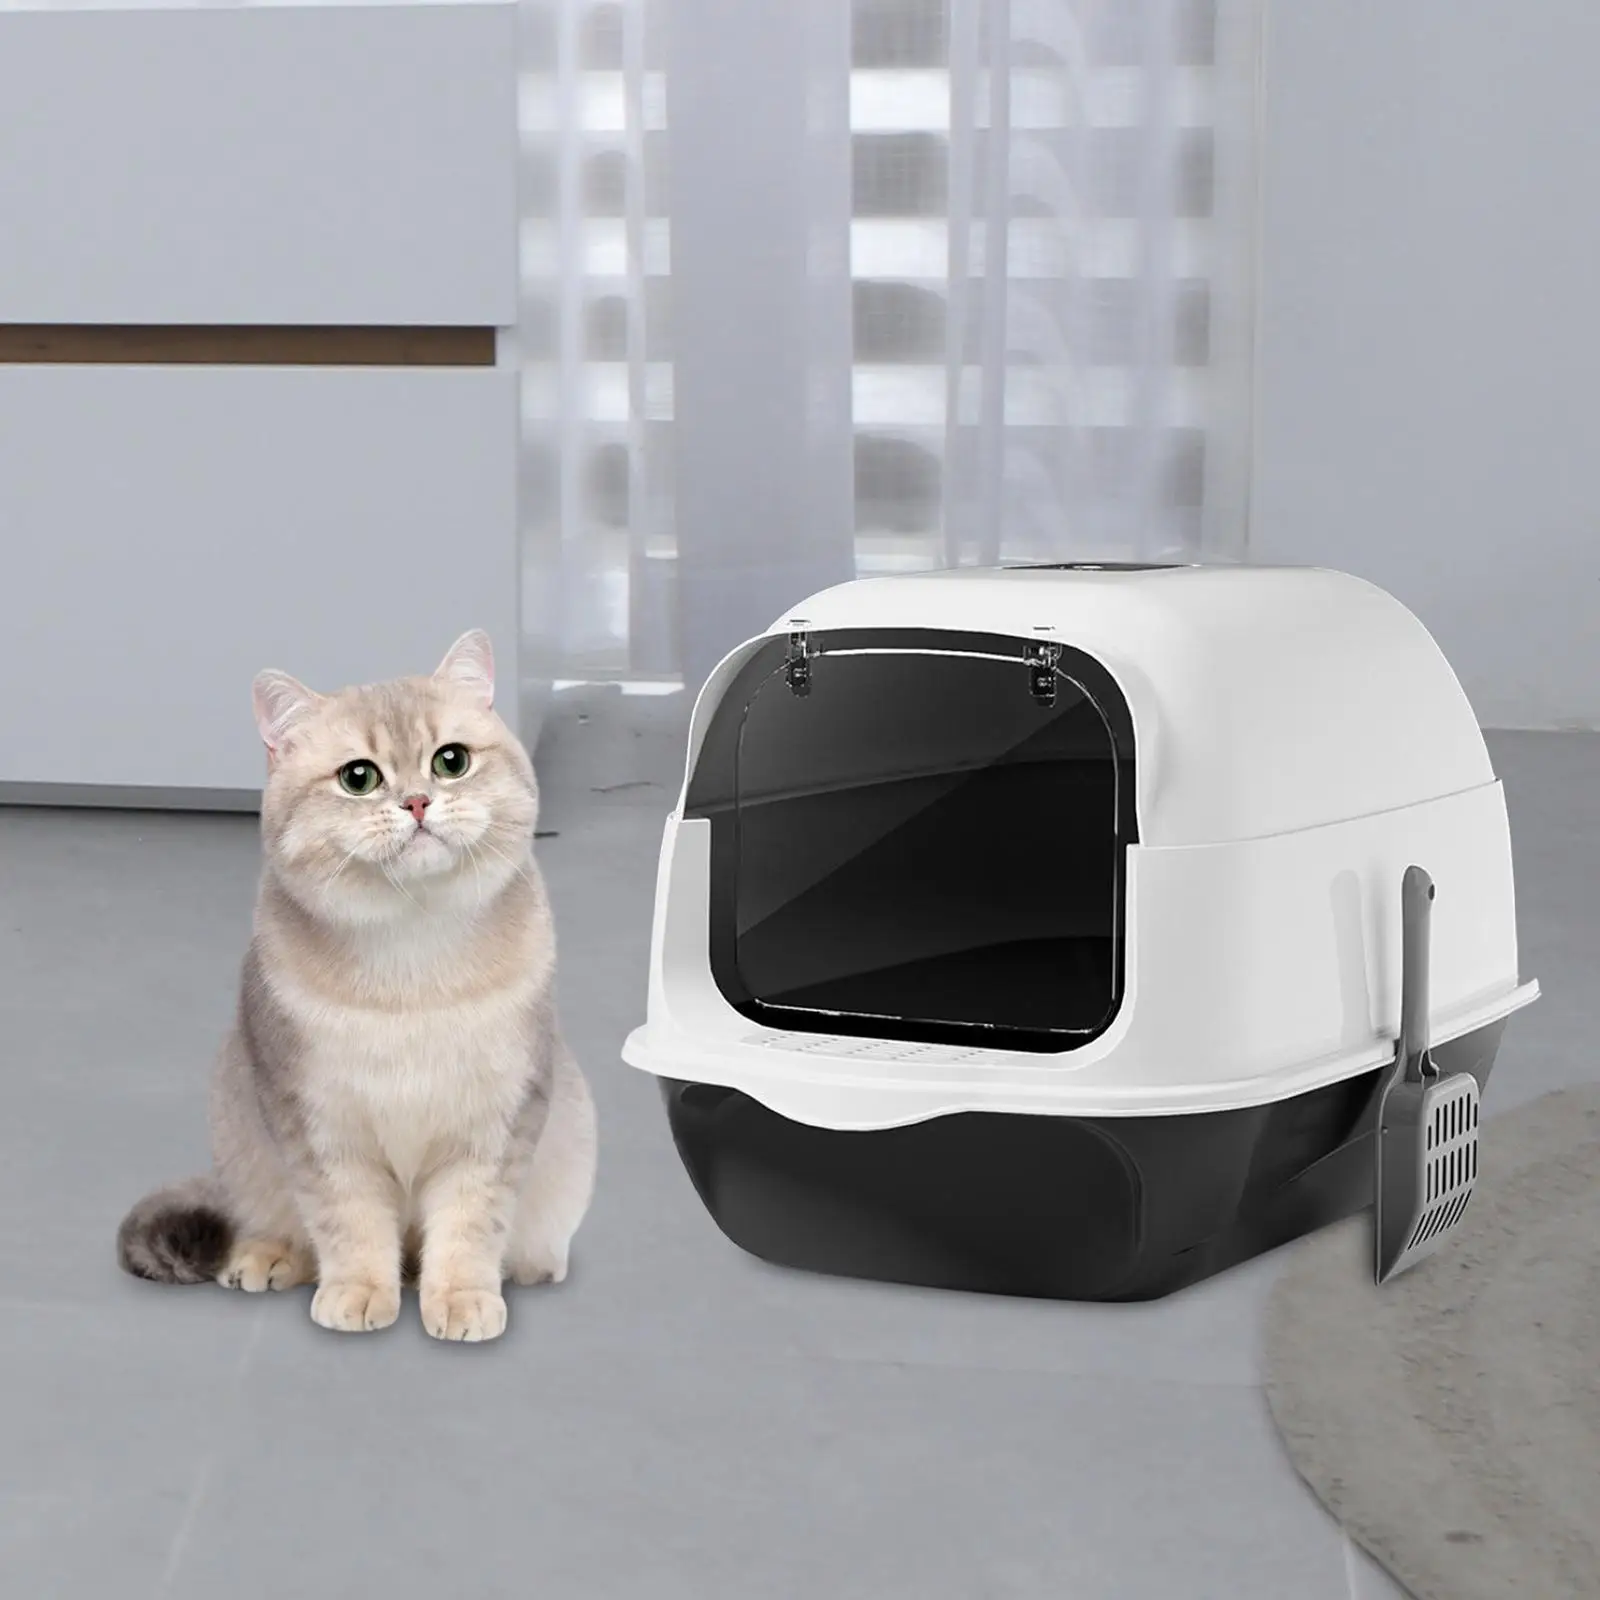 Hooded Cat Litter Box Enclosed and Covered Cat Toilet Portable Large Cat Litter Box with Door Pet Litter Tray Pet Litter Box